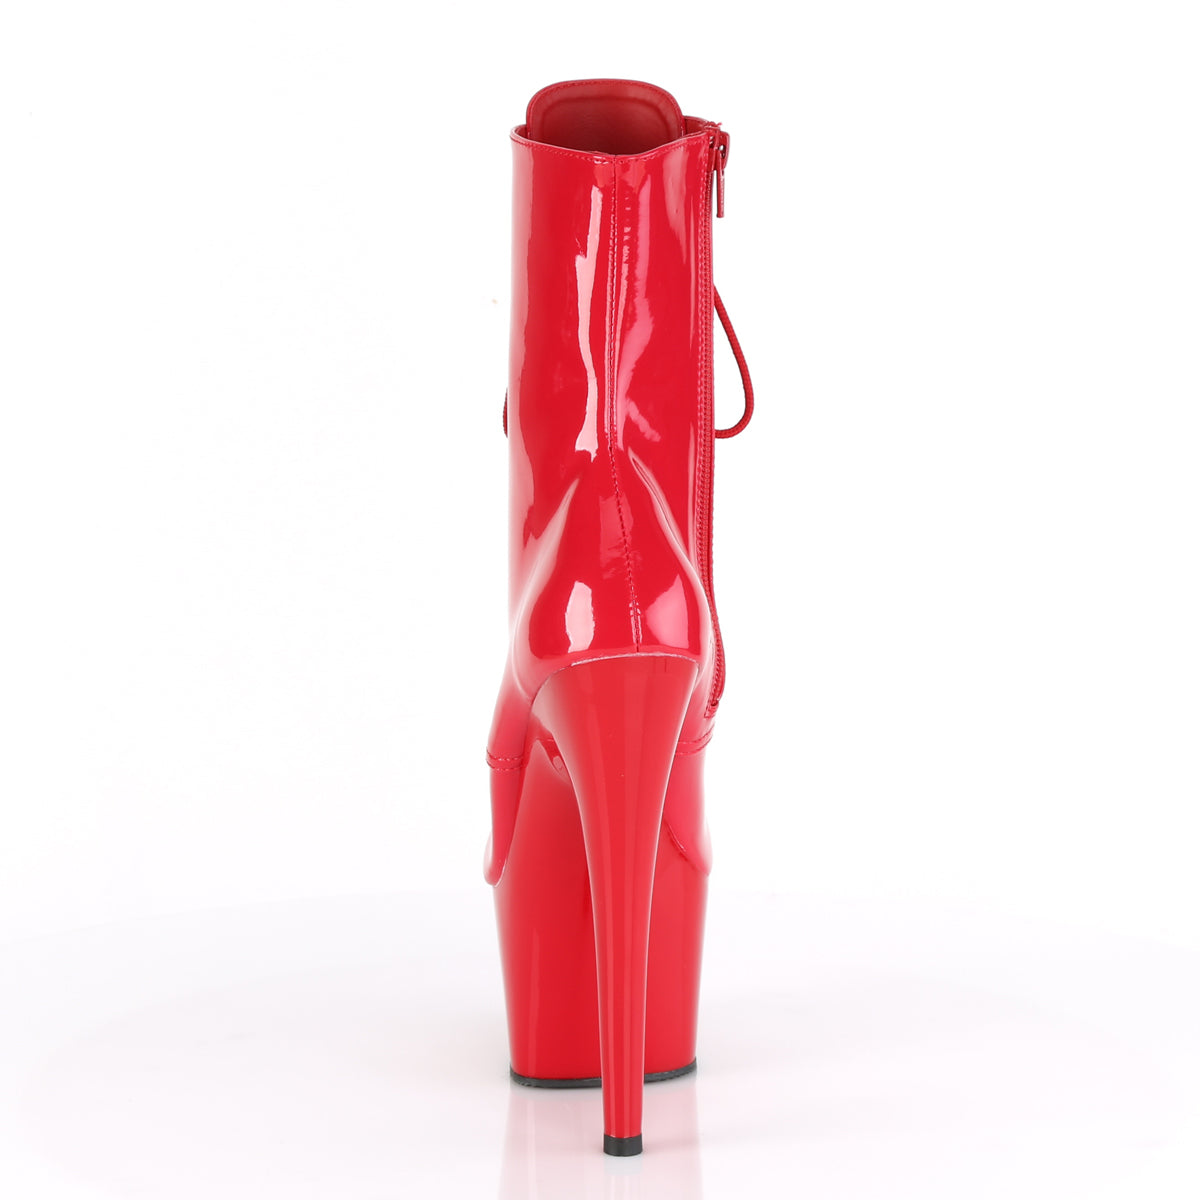 ADORE-1020 Red Patent/Red Ankle Boot Pleaser